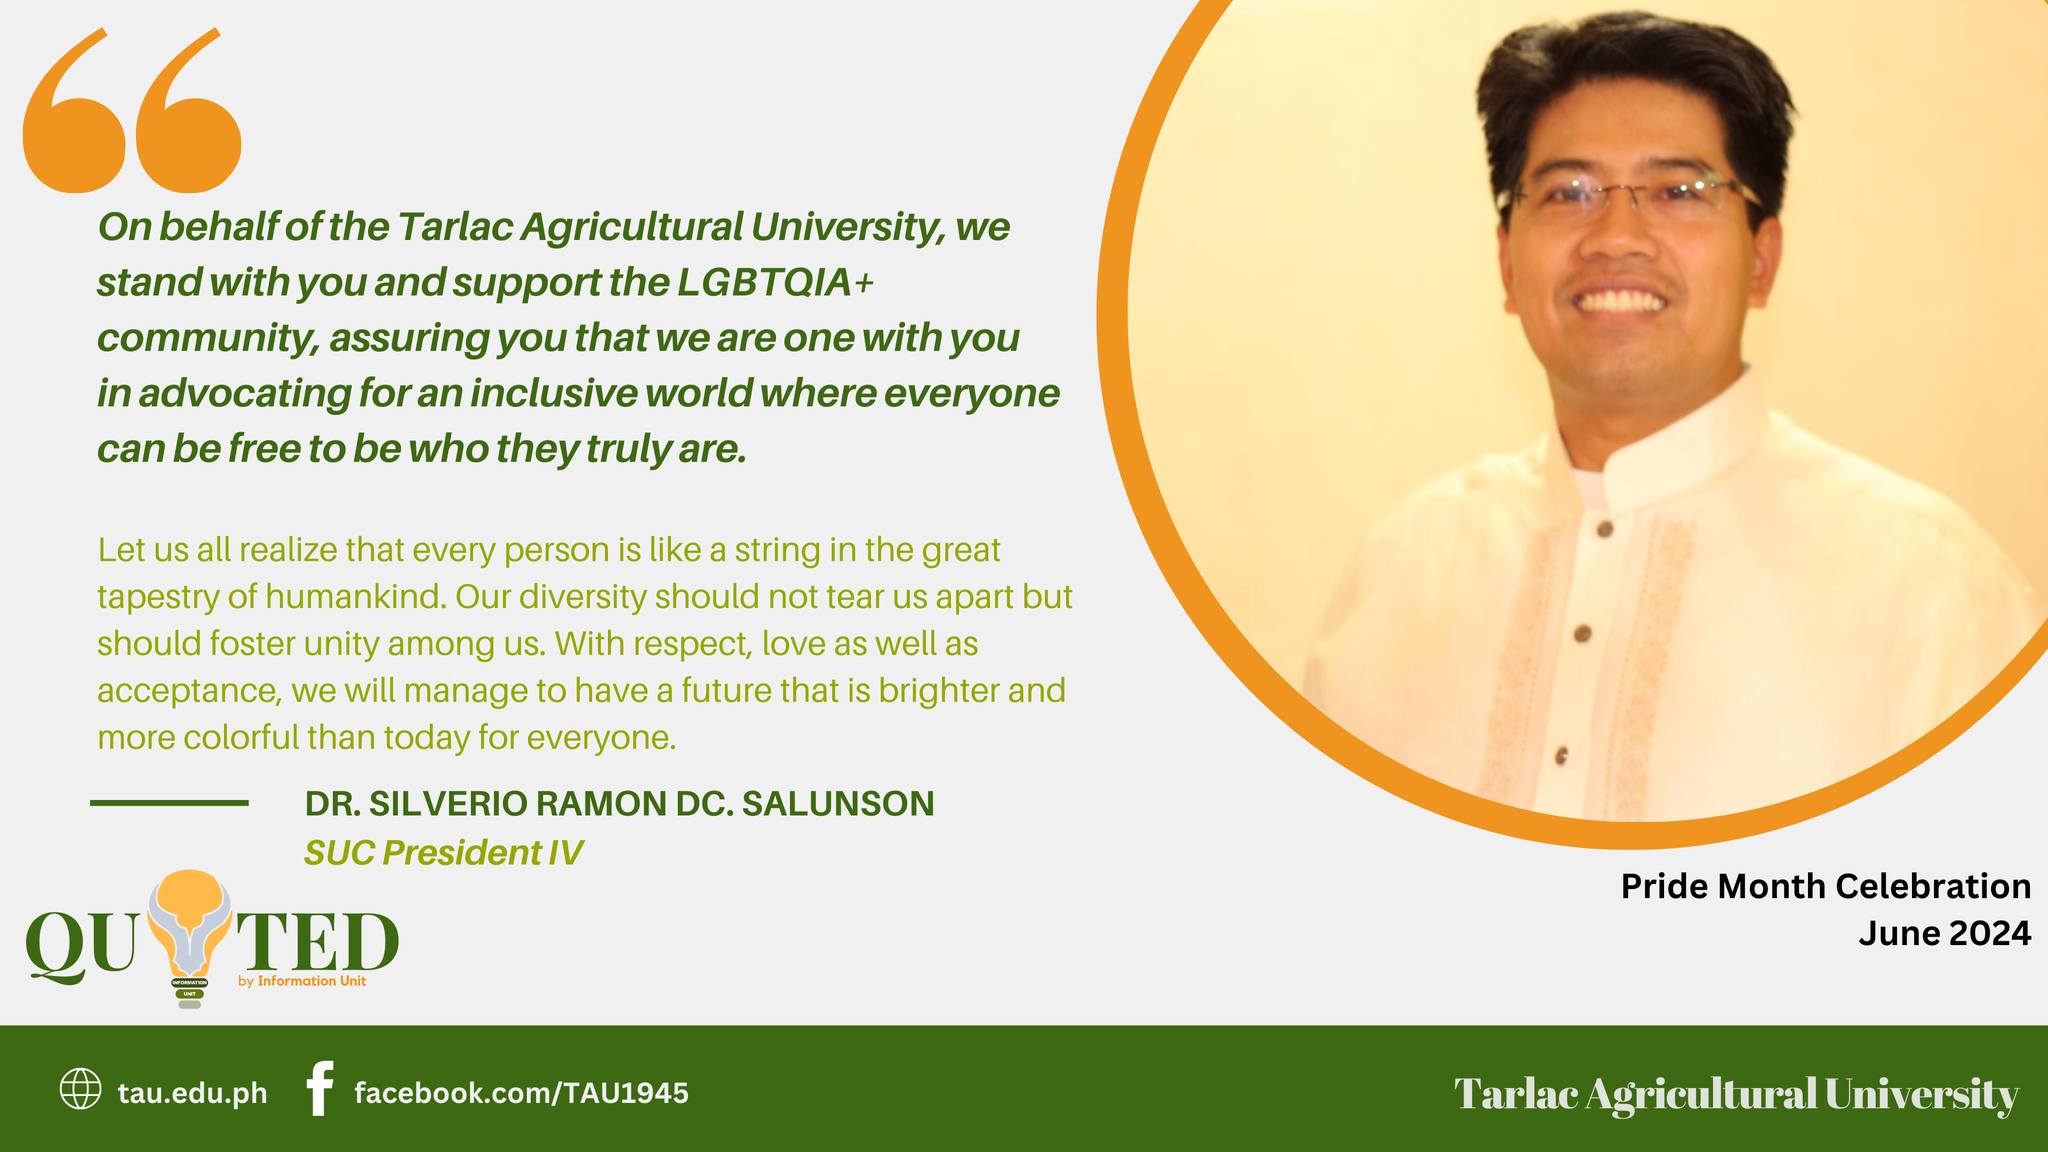 Tarlac Agricultural University (TAU) President Dr. Silverio Ramon DC. Salunson reiterates the importance of valuing the extraordinary contribution of LGBTQIA+ community in the society.